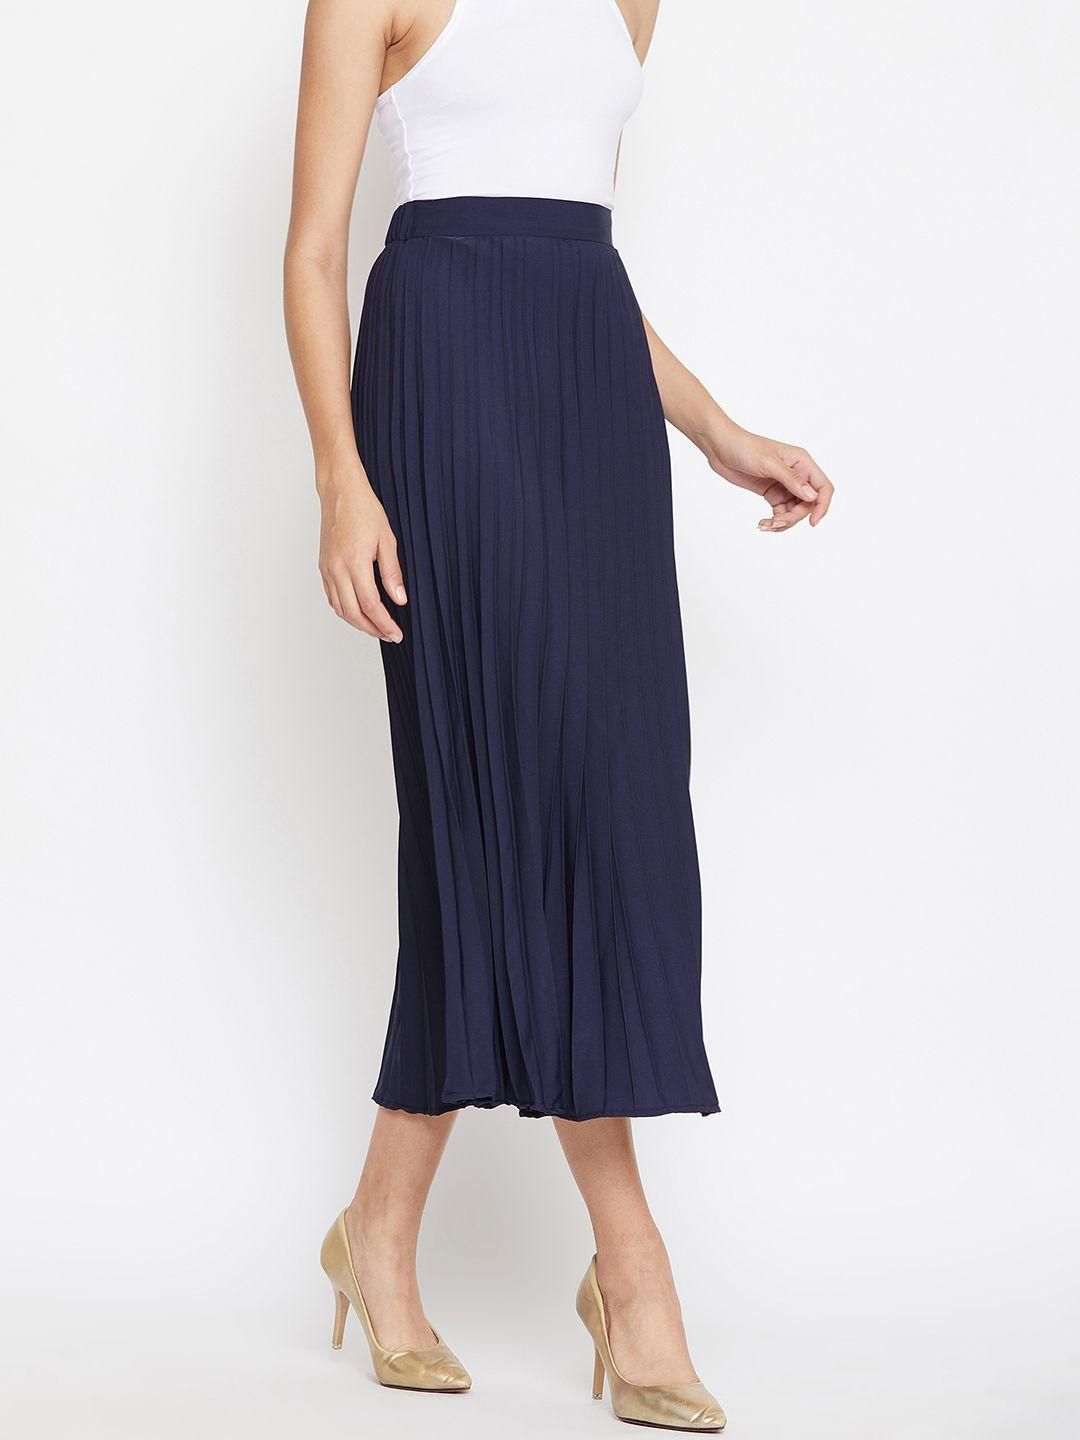 UPTOWNIE Women's Crepe Solid Mid Length Skirt